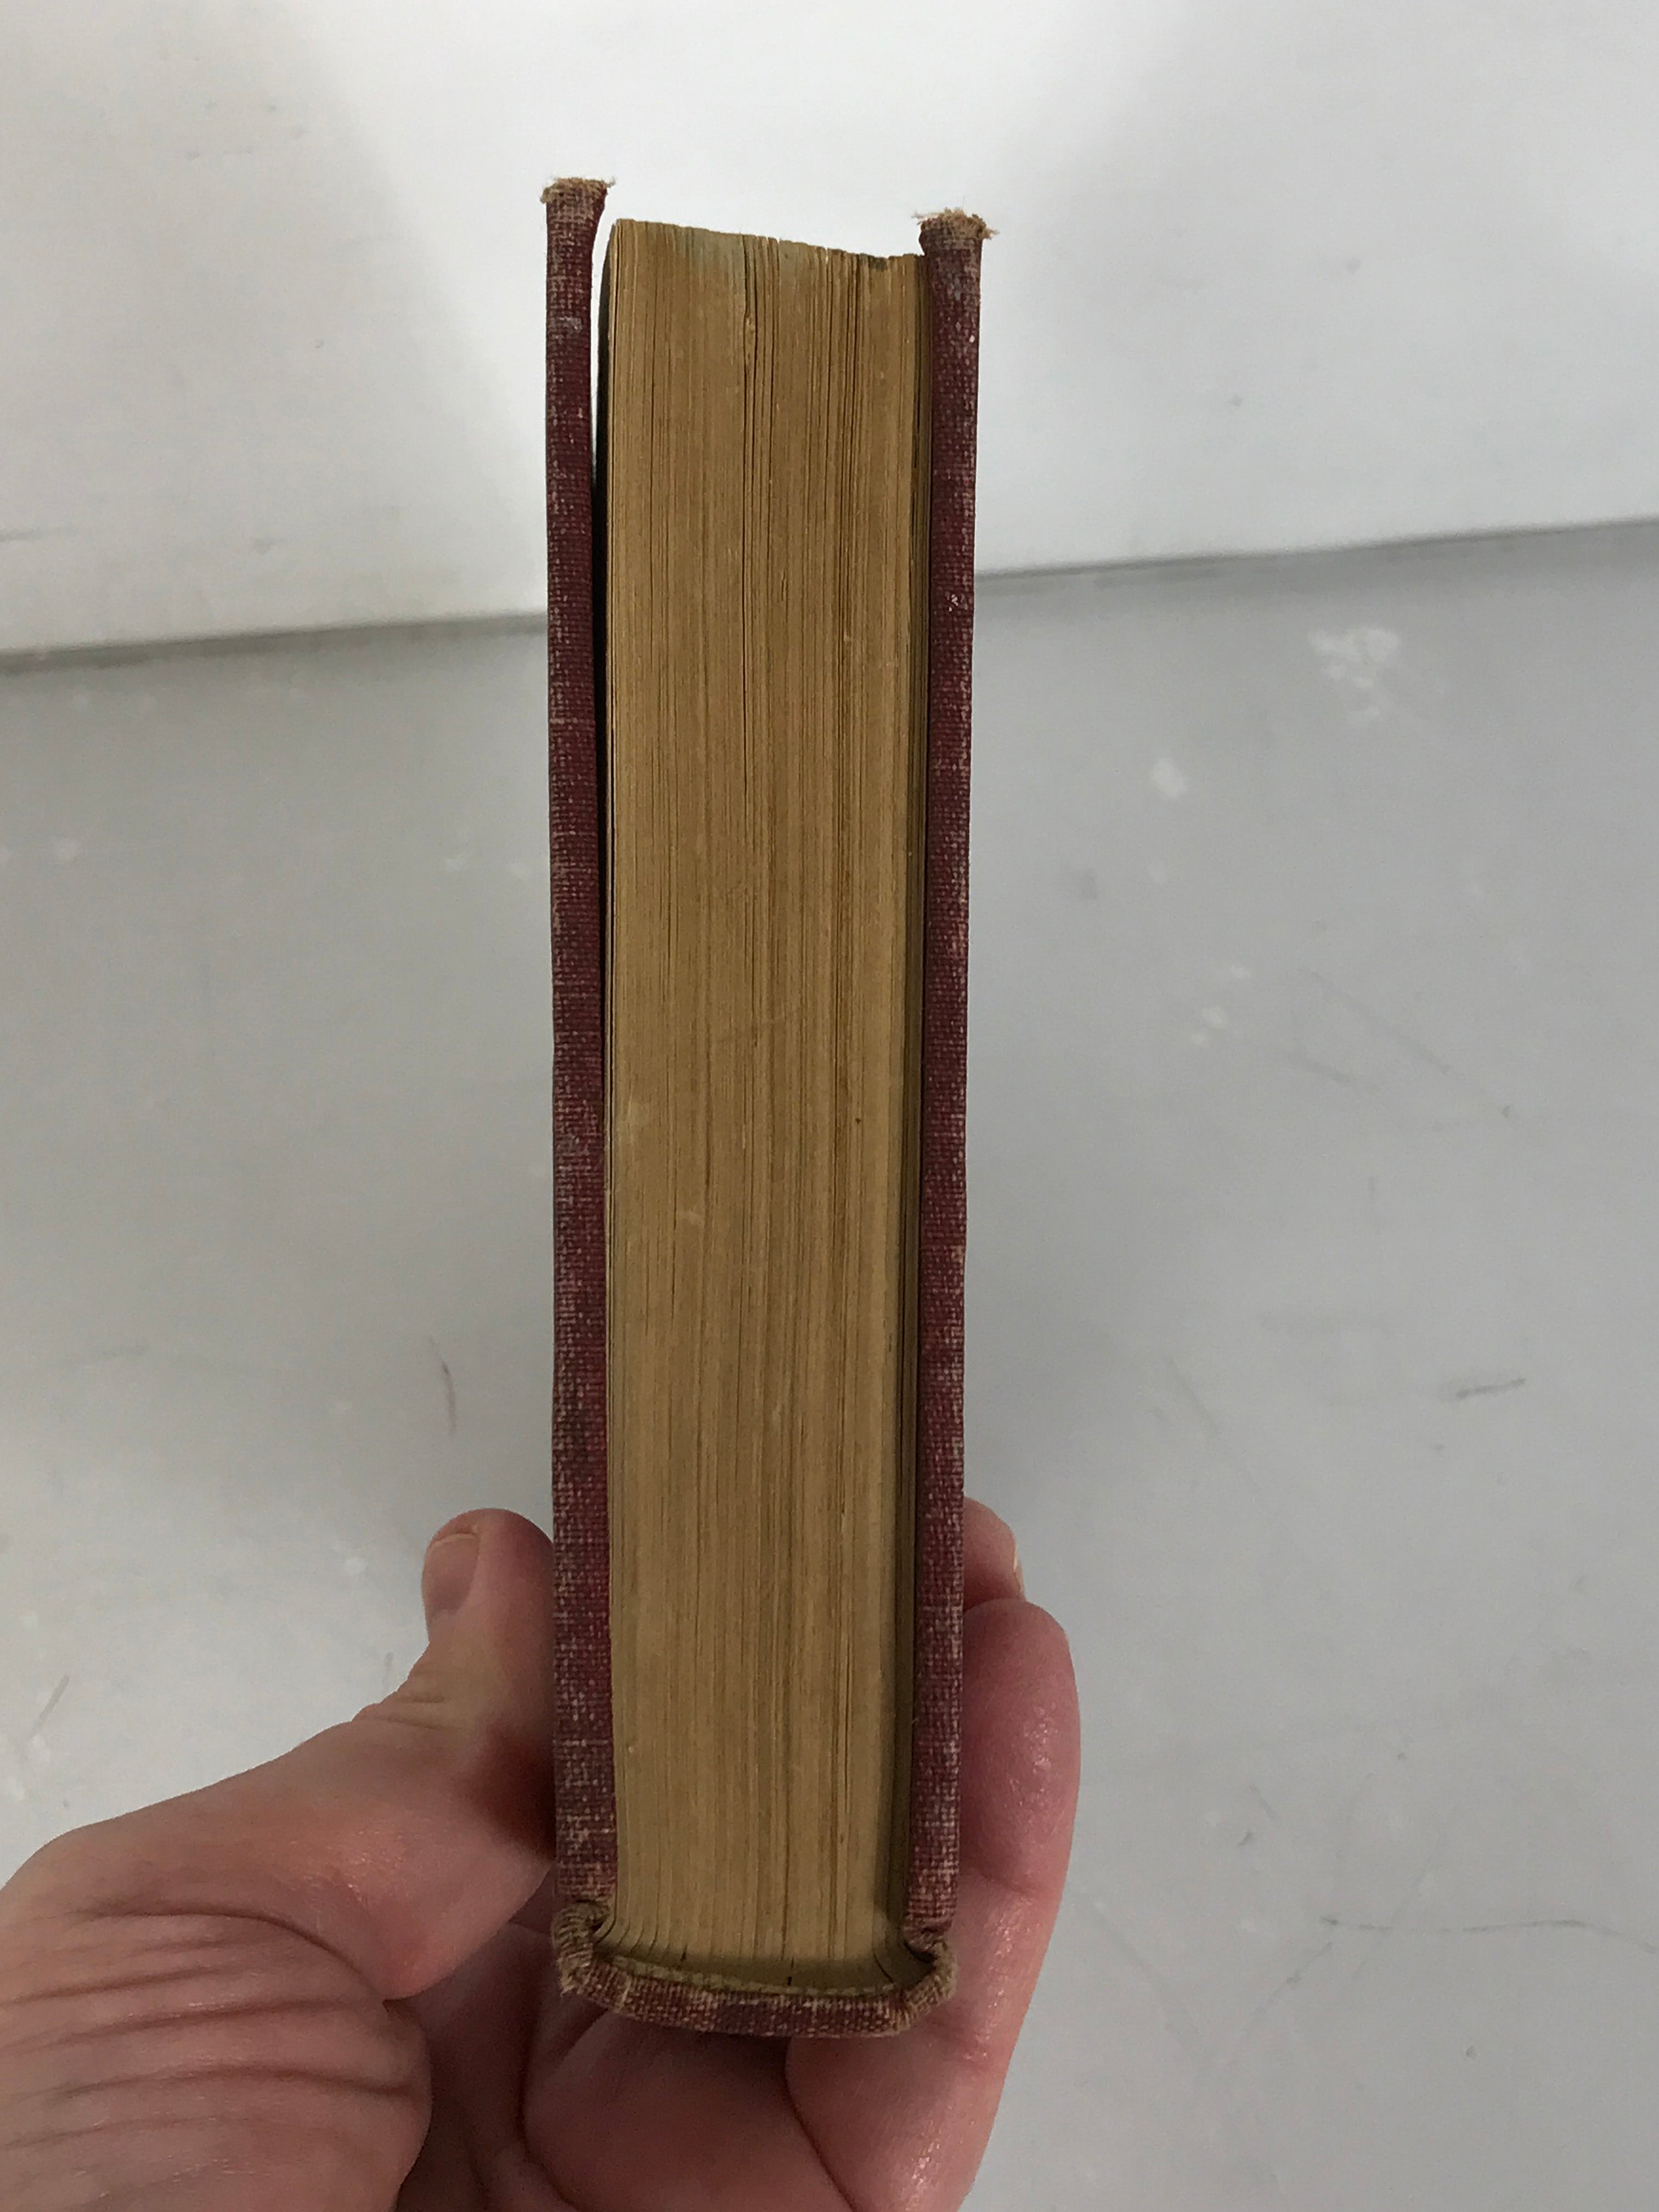 The Honor of the Name (Part II) and The Lerouge Affair by Emile Gaboriau Antique Lecoq Edition 1908 HC